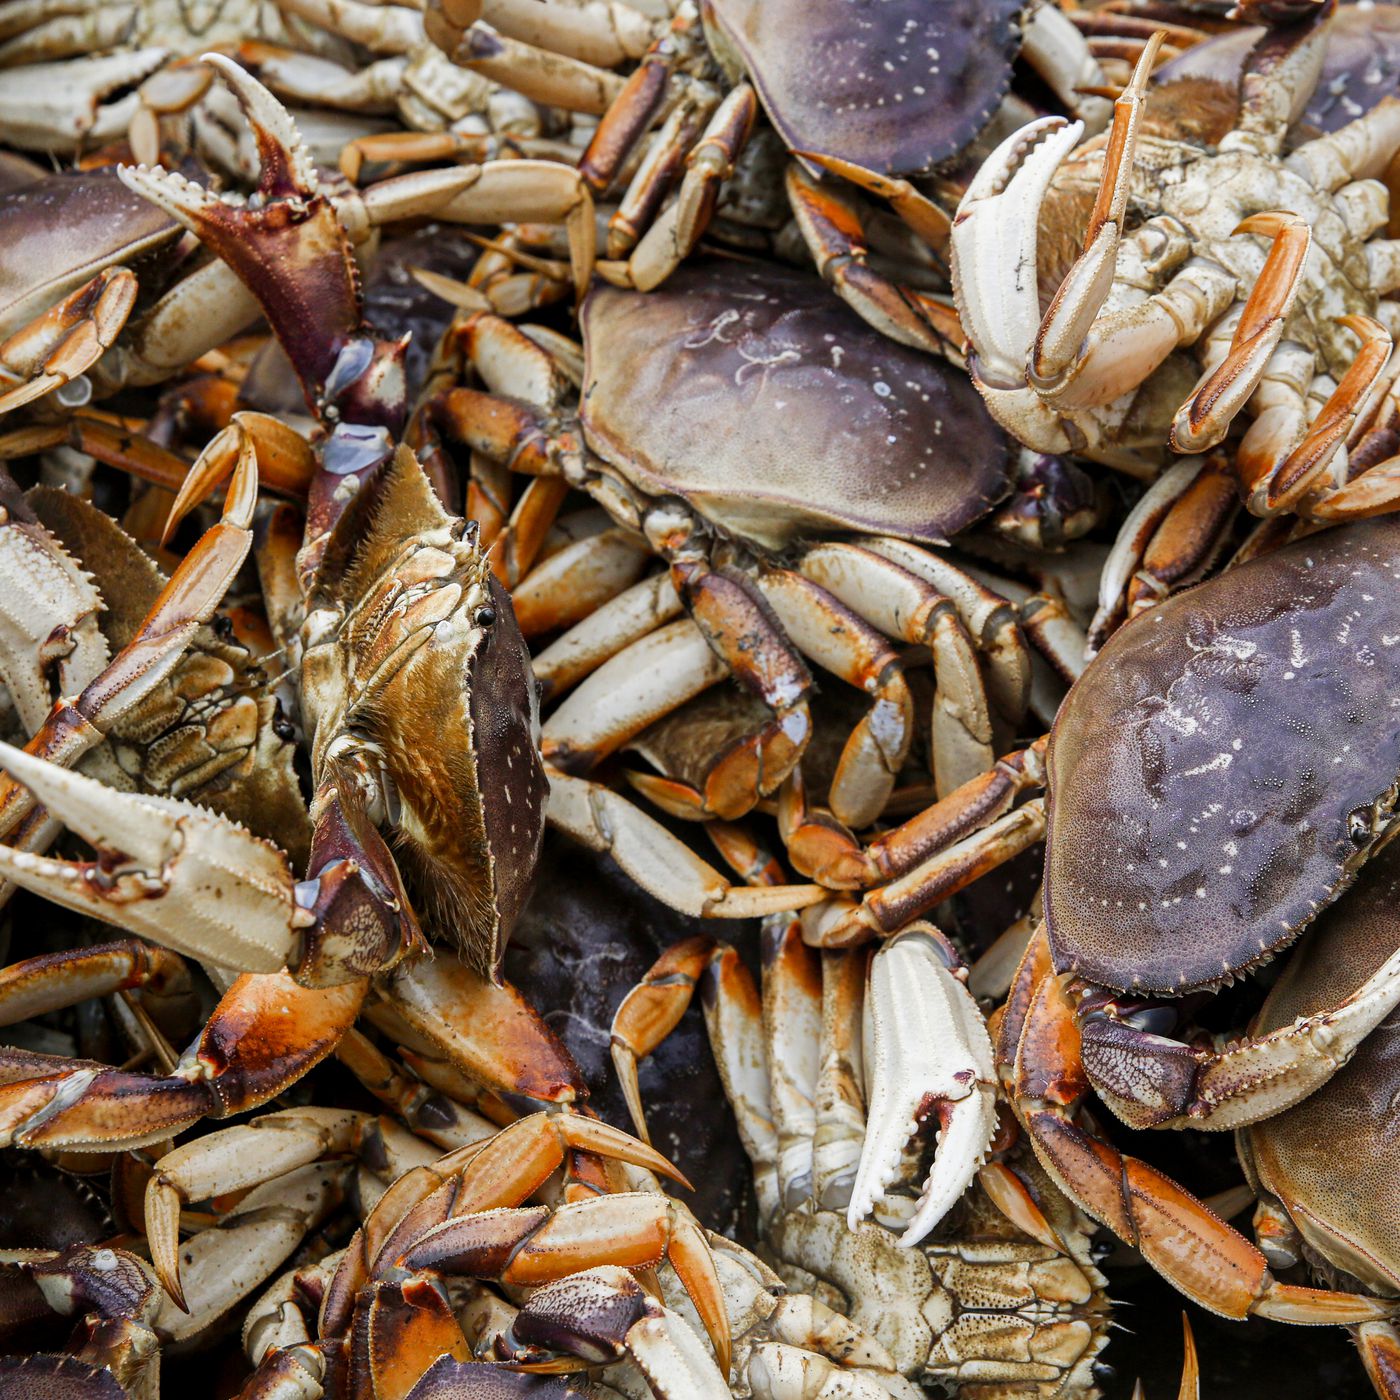 Freshly sourced live Dungeness crabs, nestled in a secure container, ready to be shipped to seafood enthusiasts, showcasing Global Seafoods' commitment to fresh, high-quality seafood